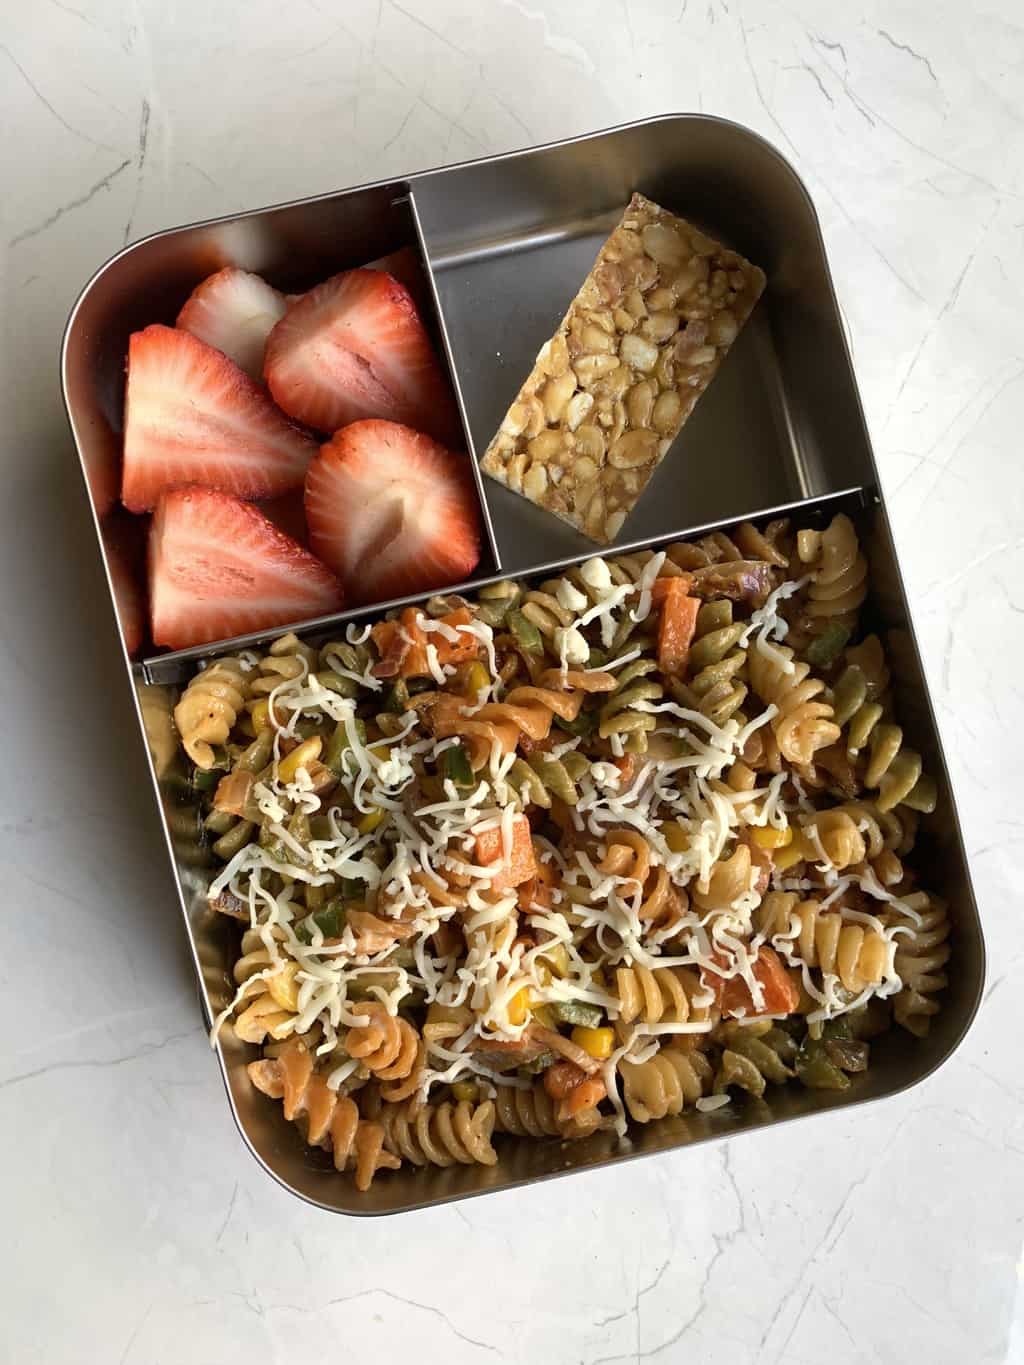 Mayonnaise Veggie Pasta+Strawberries+Peanut Chikki﻿|This pasta is a delicious quick pasta recipe with veggies, mayonnaise and cheese|indianveggiedelight.com